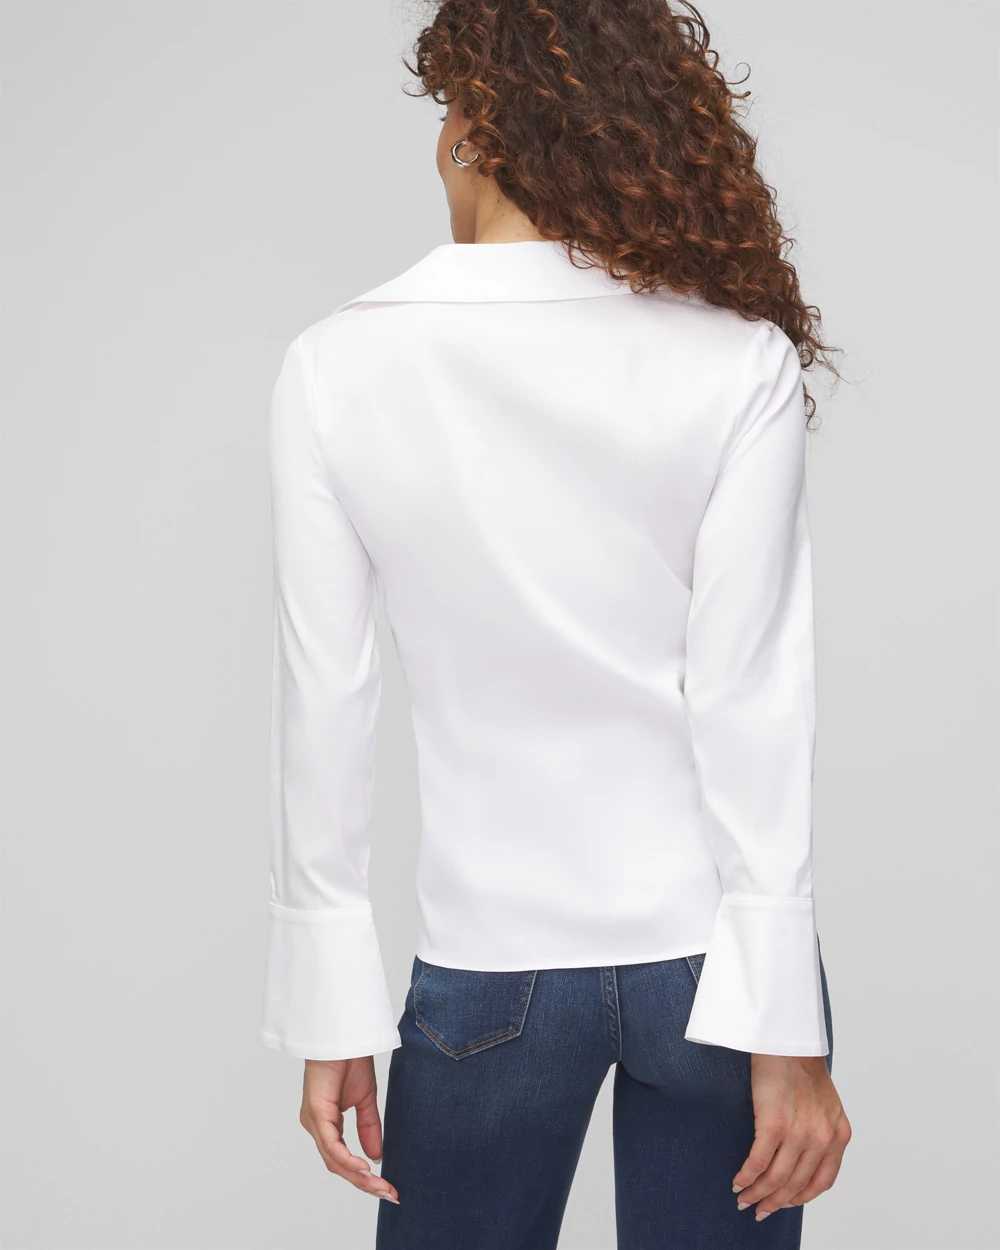 Long Sleeve Twist Poplin Shirt click to view larger image.